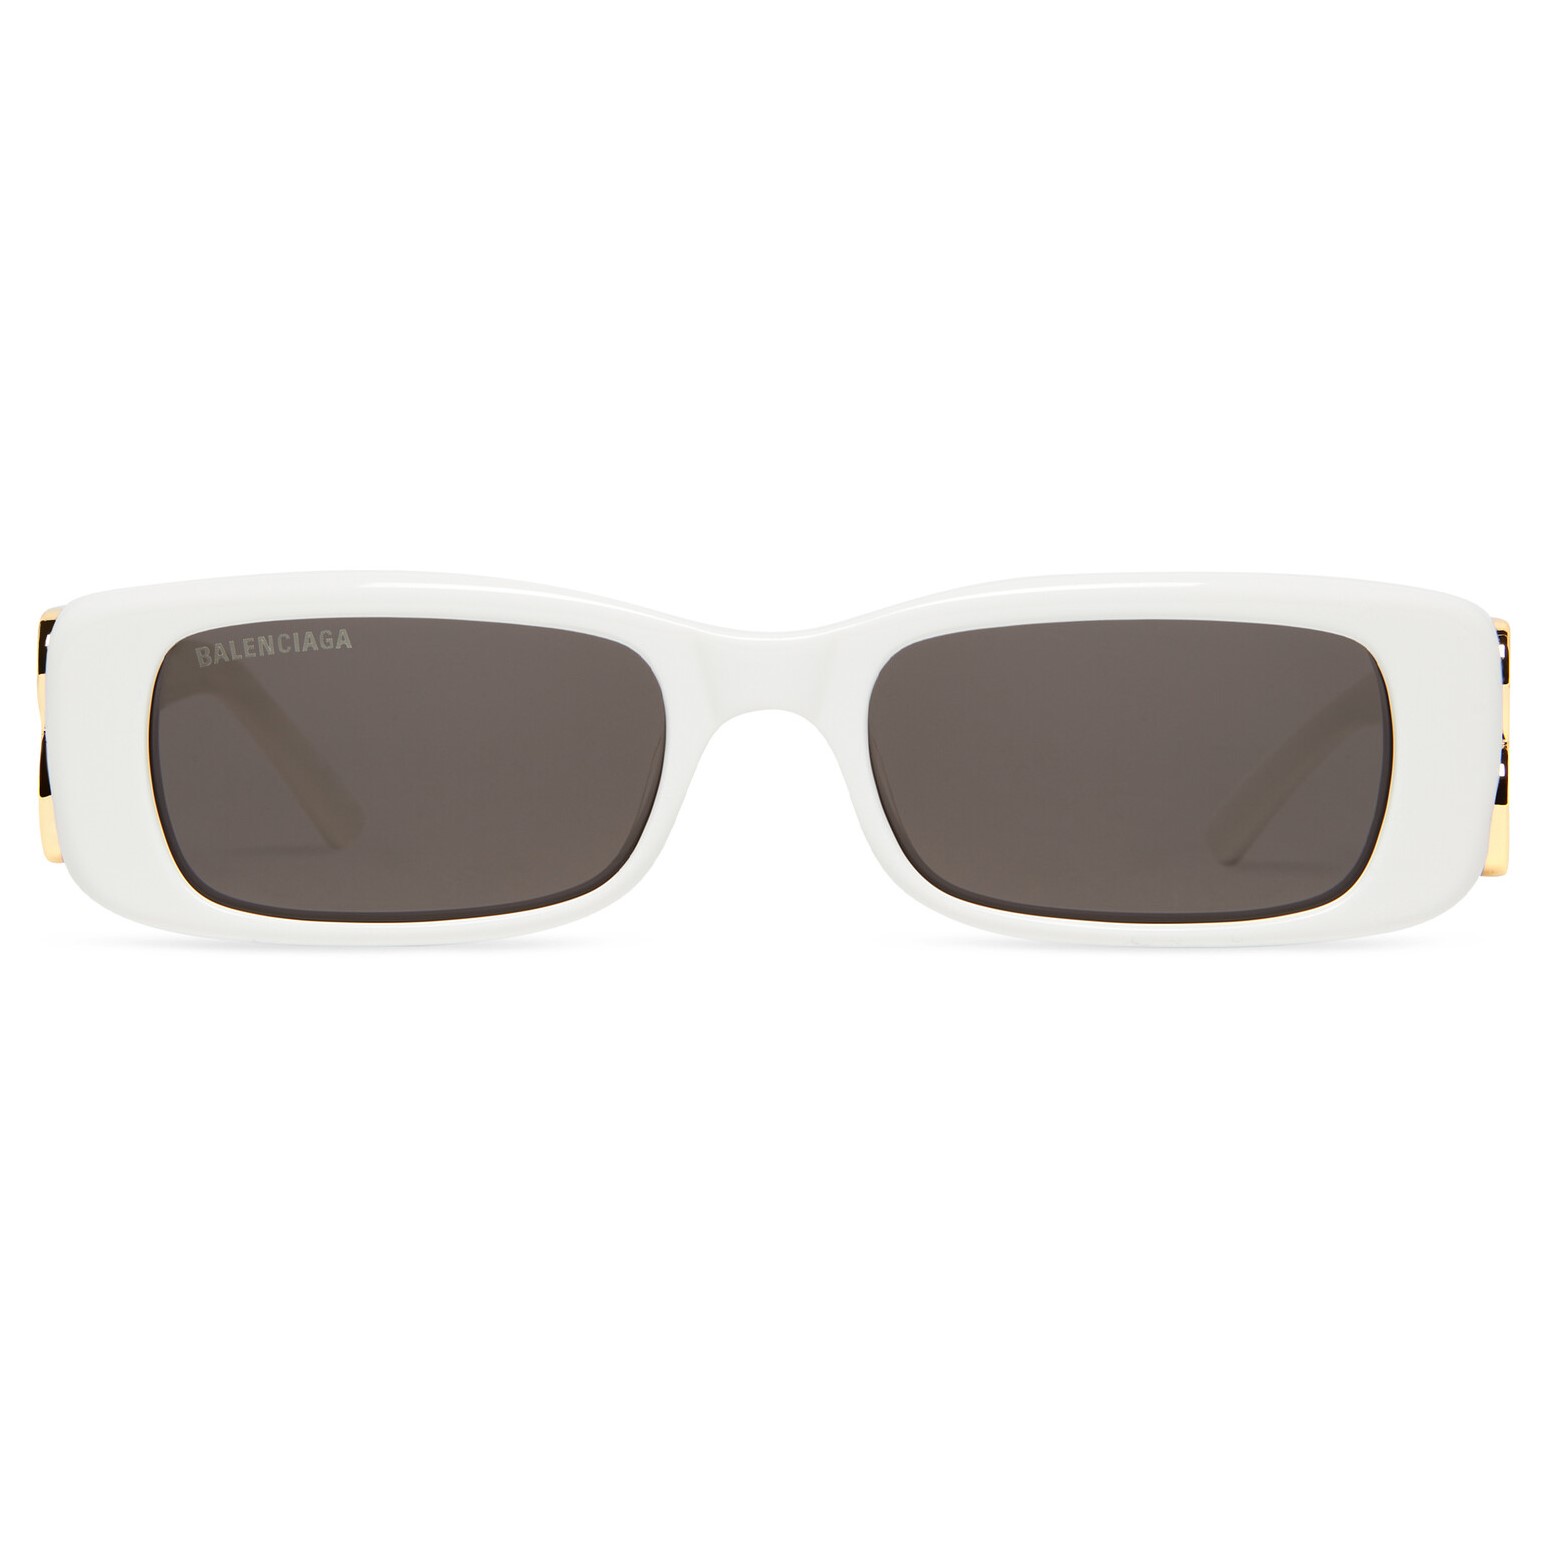 MẮT KÍNH UNISEX BALENCIAGA DYNASTY BB RECTANGLE SQUARE FRAME ACETATE AND GOLD TONE SUNGLASSES BB0096S 4